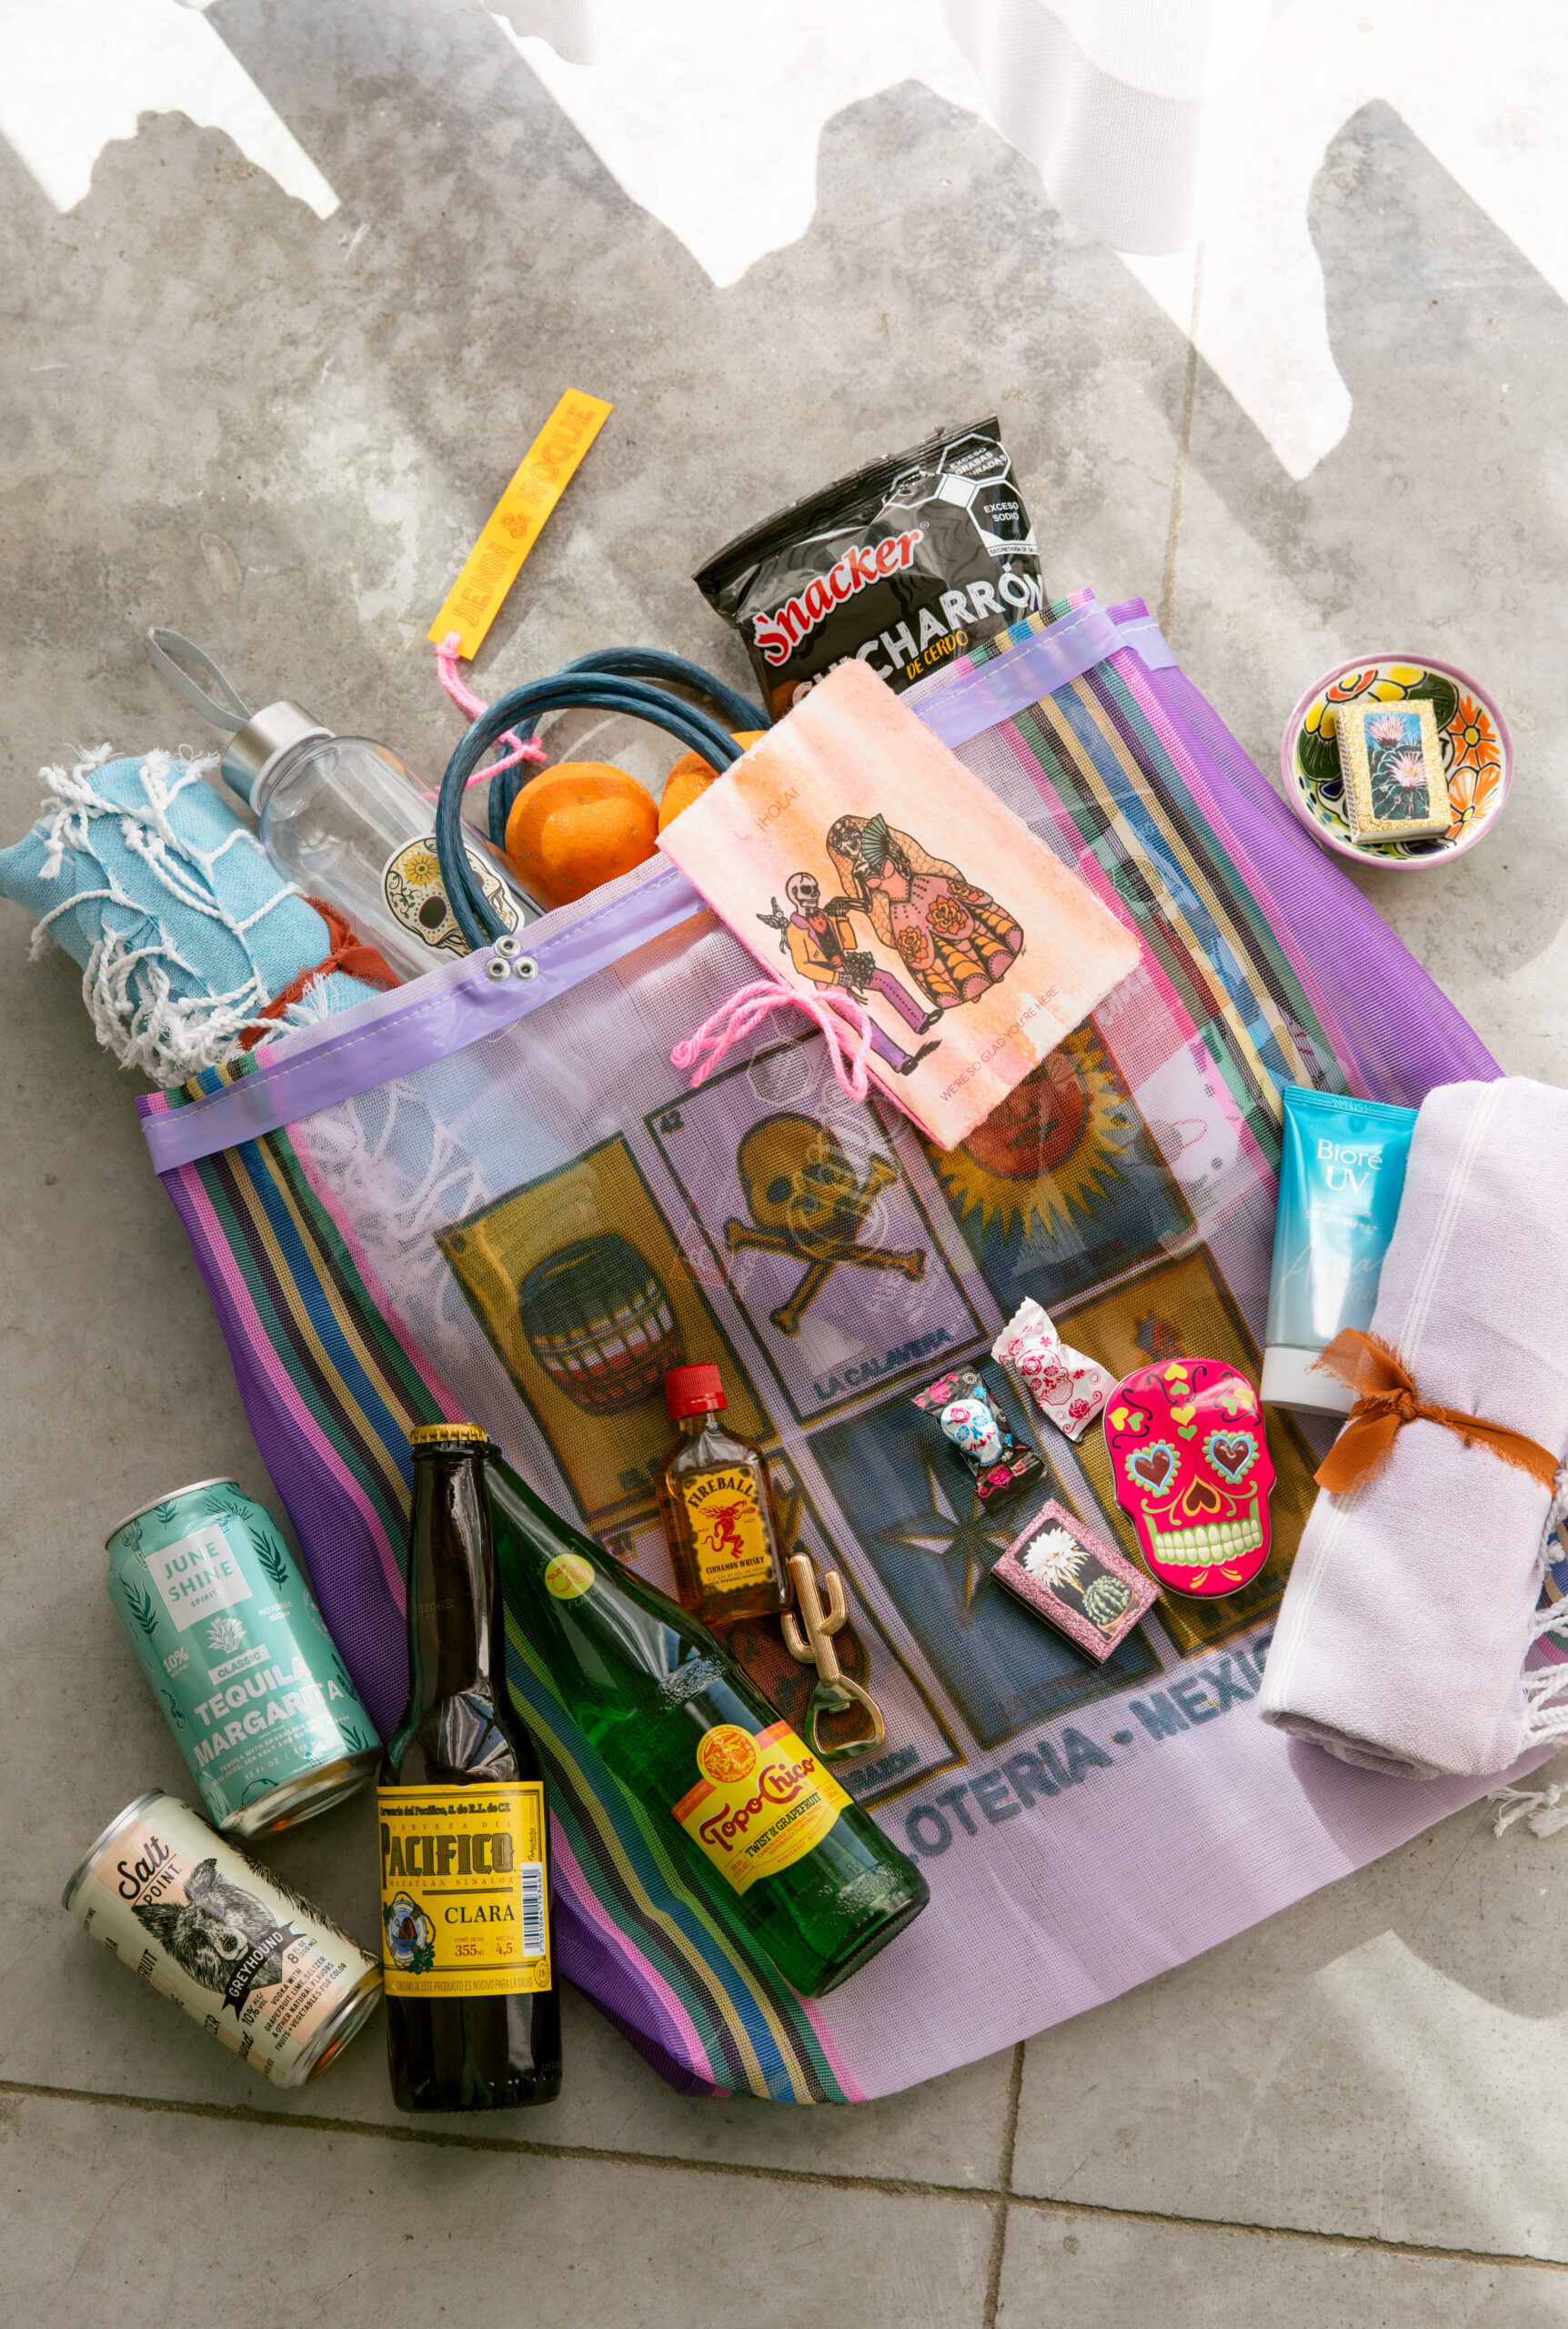 Colorful gift bags Mexican wedding. Purple loteria themed tote bag from Mexican art market. Locally sourced Mexican snacks. Handmade wedding itinerary. Topo chico. custom matches. Skull candies. beach towels. Reusable water bottle. hand crafted ceramic ash dish. Pacifico. Salt Point. Canned margarita. mini fireball. gold cactus bottle opener. 